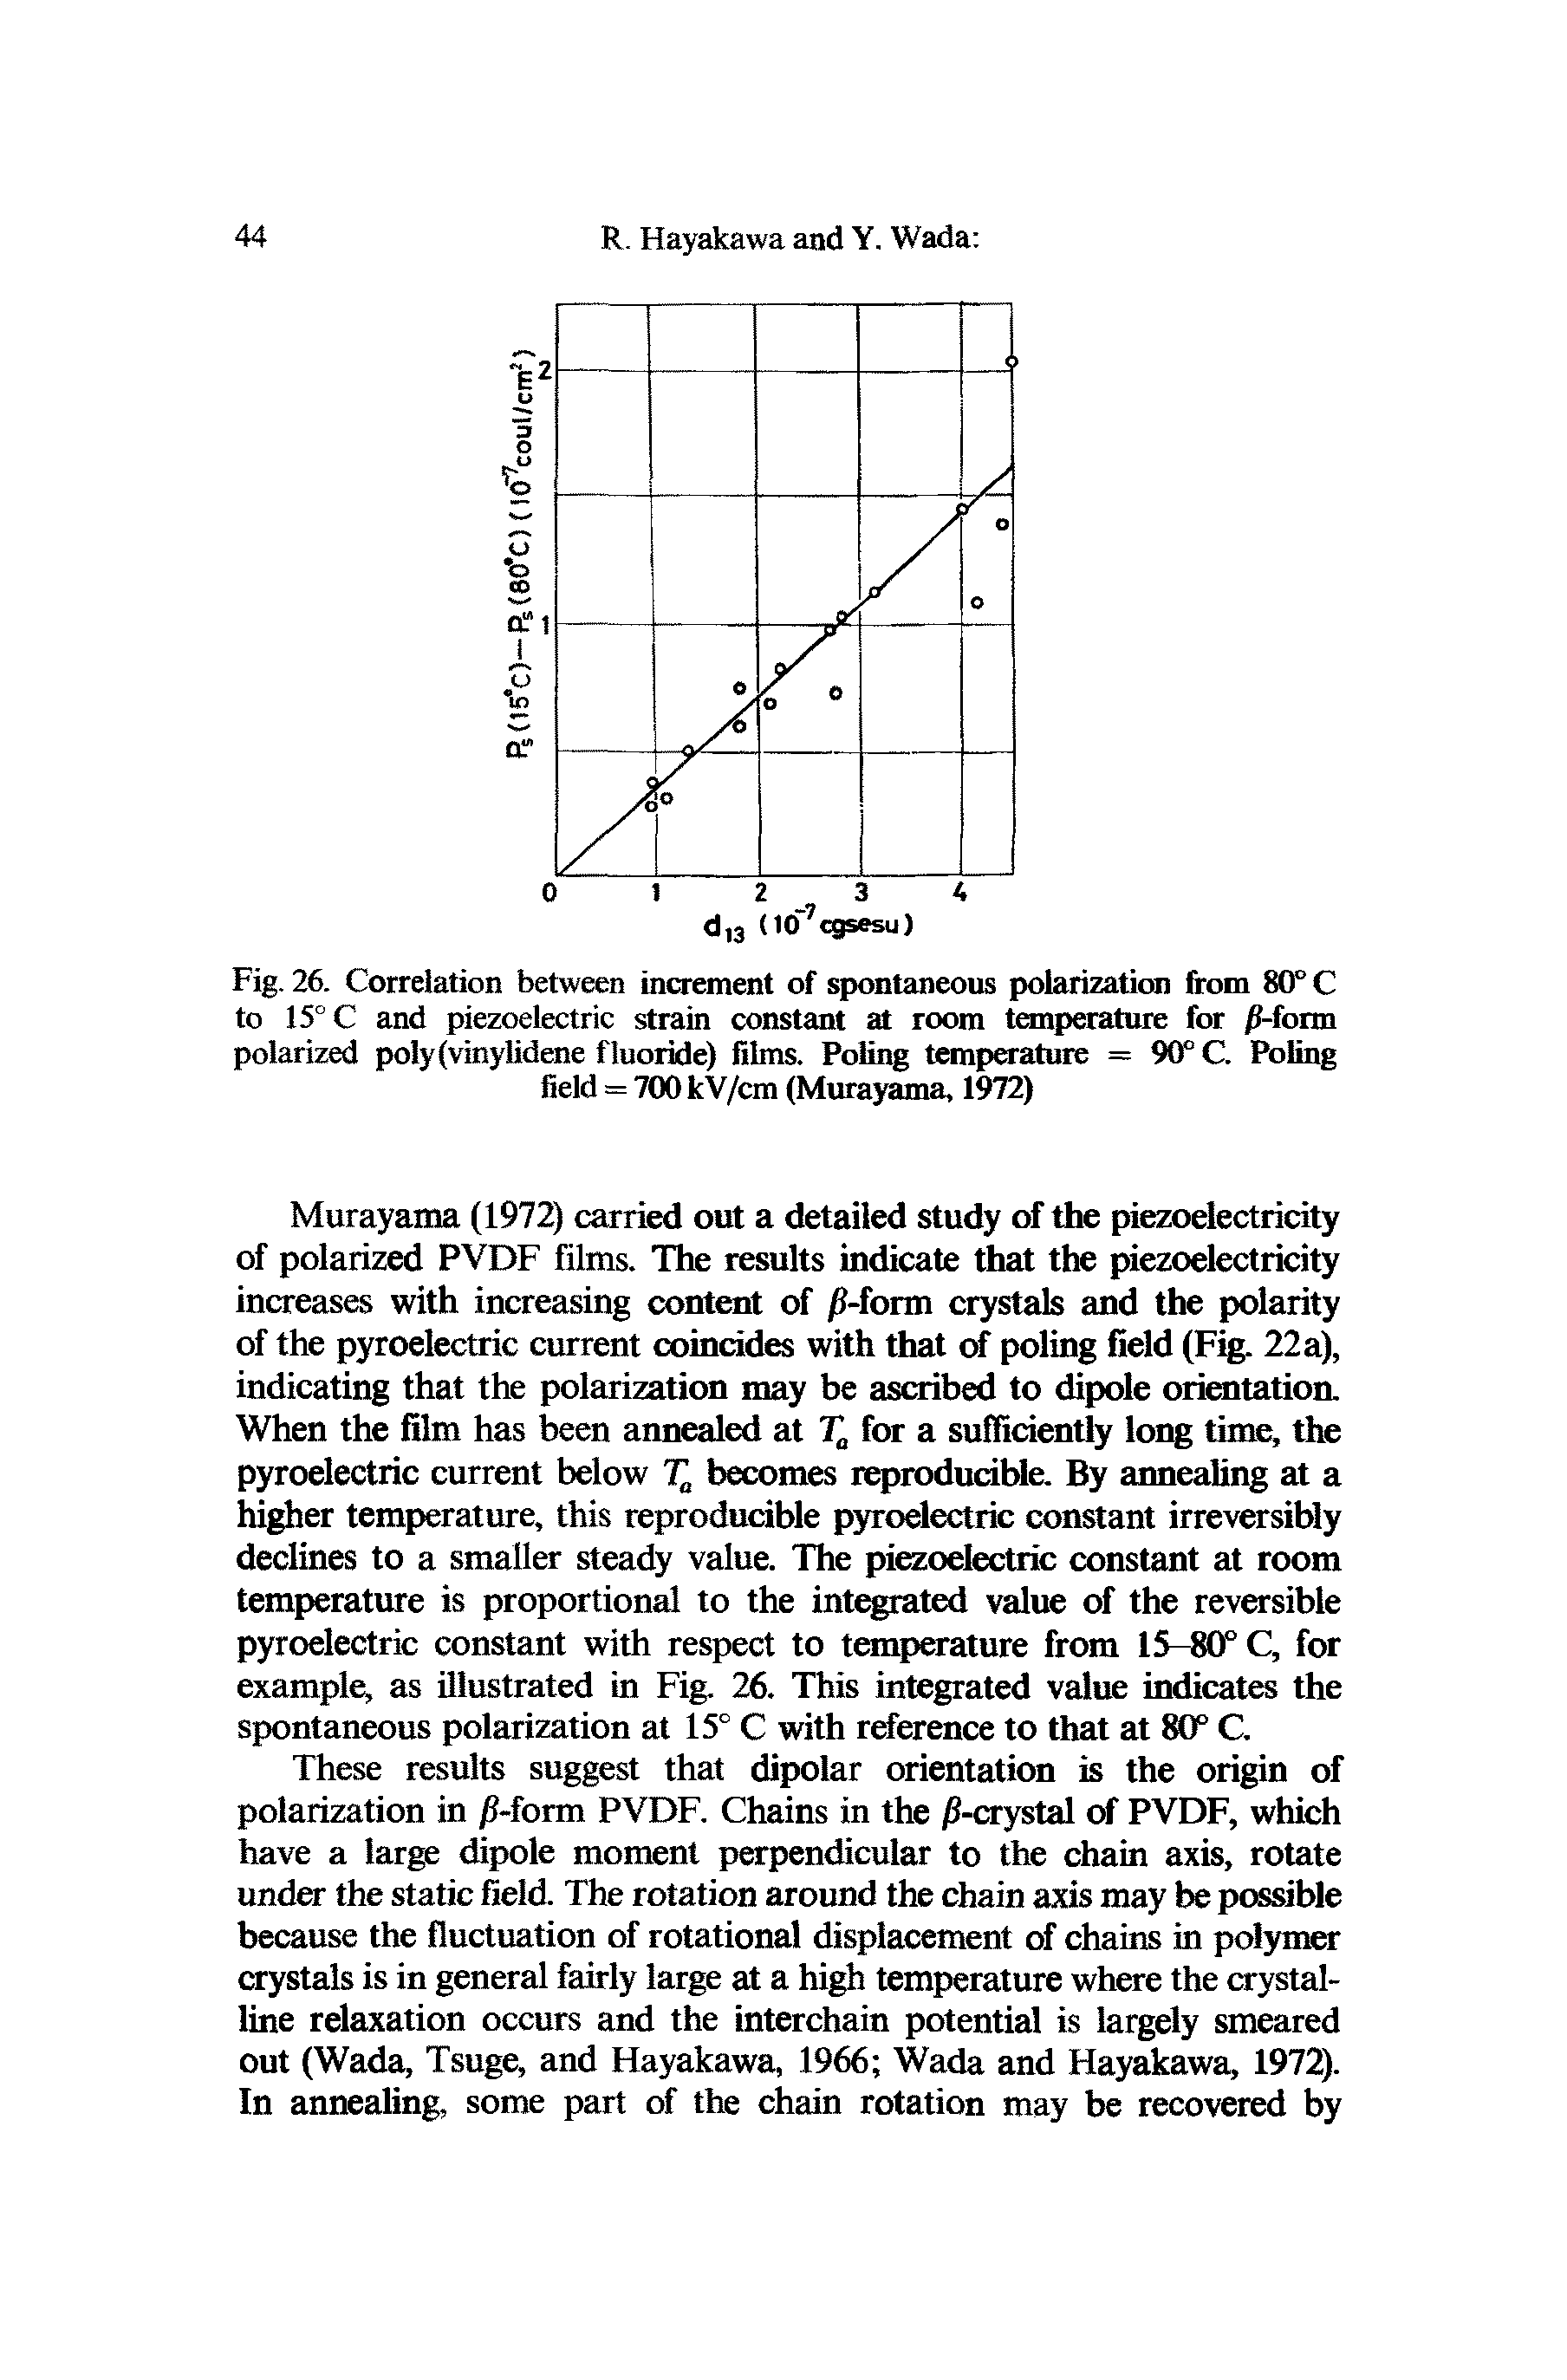 Fig. 26. Correlation between increment of spontaneous polarization from 80° C to 15° C and piezoelectric strain constant at room temperature for /9-form polarized poly(vinylidene fluoride) films. Poling temperature = 90° C. Poling field = 700 kV/cm (Murayama, 1972)...